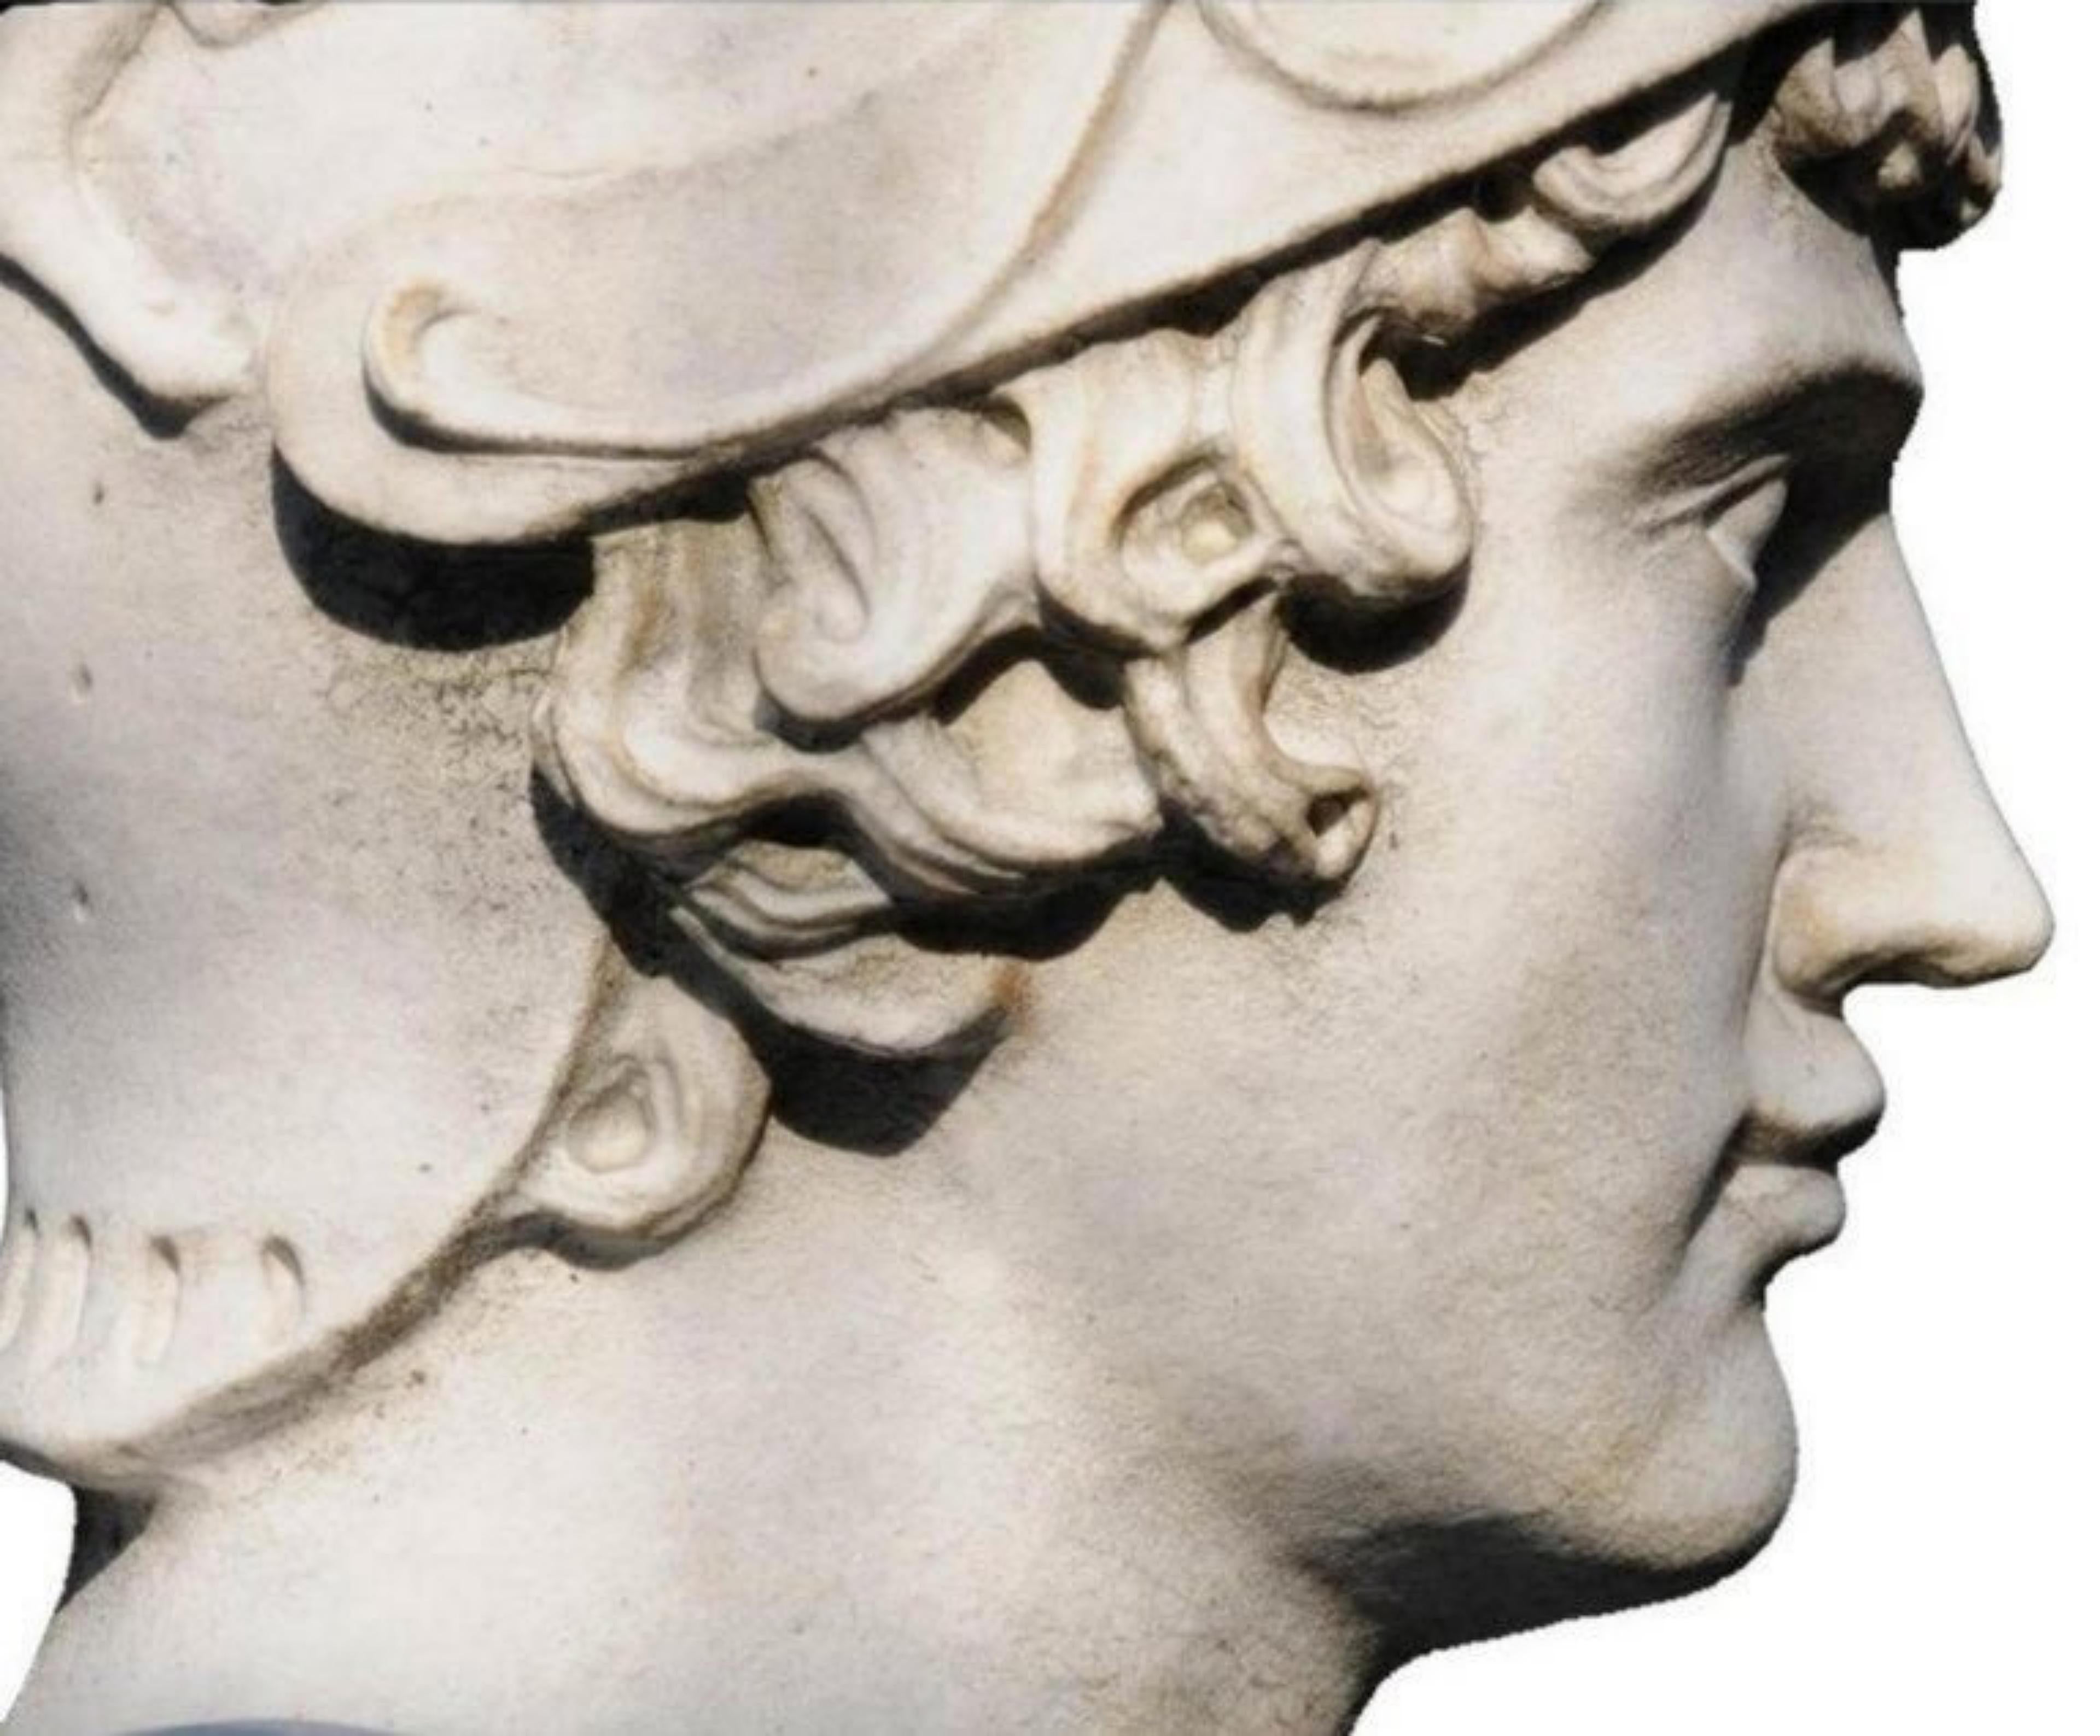 Alexander The Great.
Bust of Carrara White Marble.
20th century.
Copy of a Greek original from the Athens Museum
Measures: Height 90 cm
Width 62 cm
Depth 32 cm
Weight 150 kg
Material: white carrara marble.

Important Note: Transport is understood